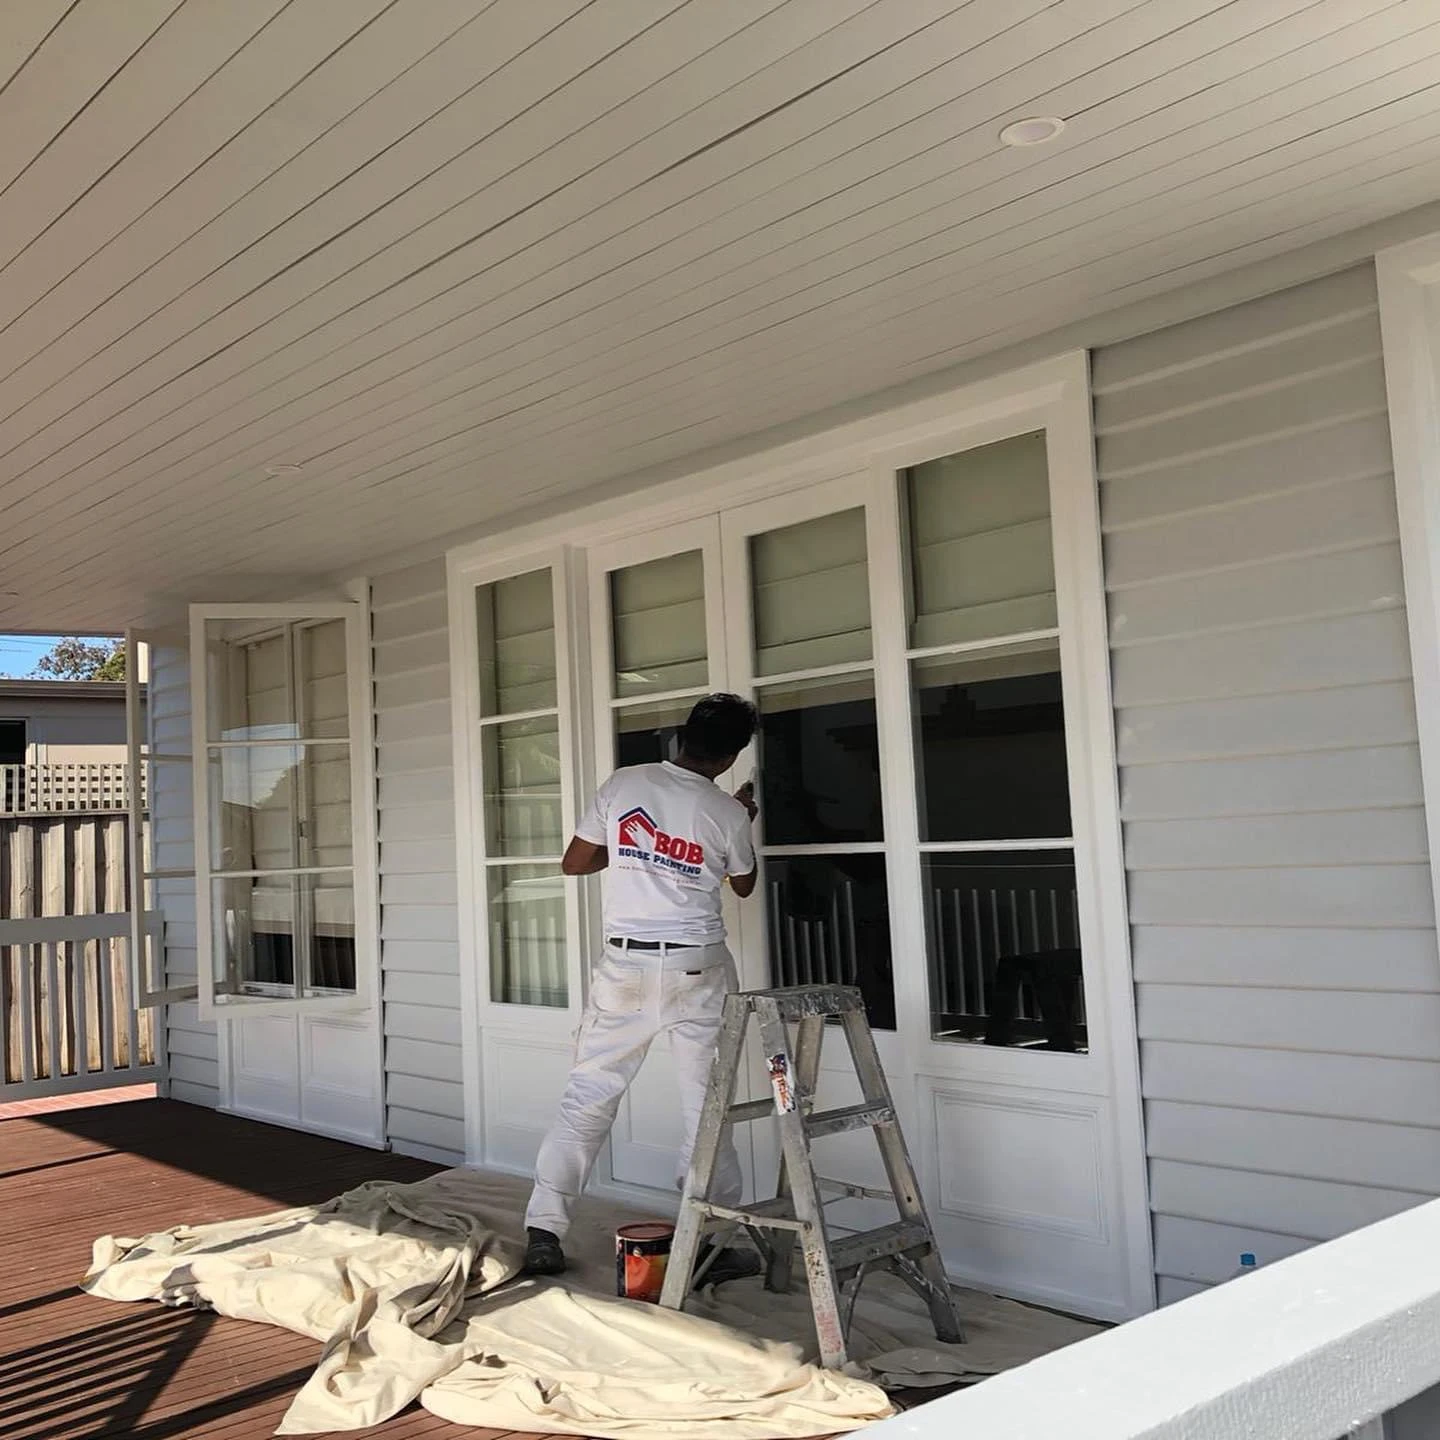 Exterior painting of the house by bob house painting professional team